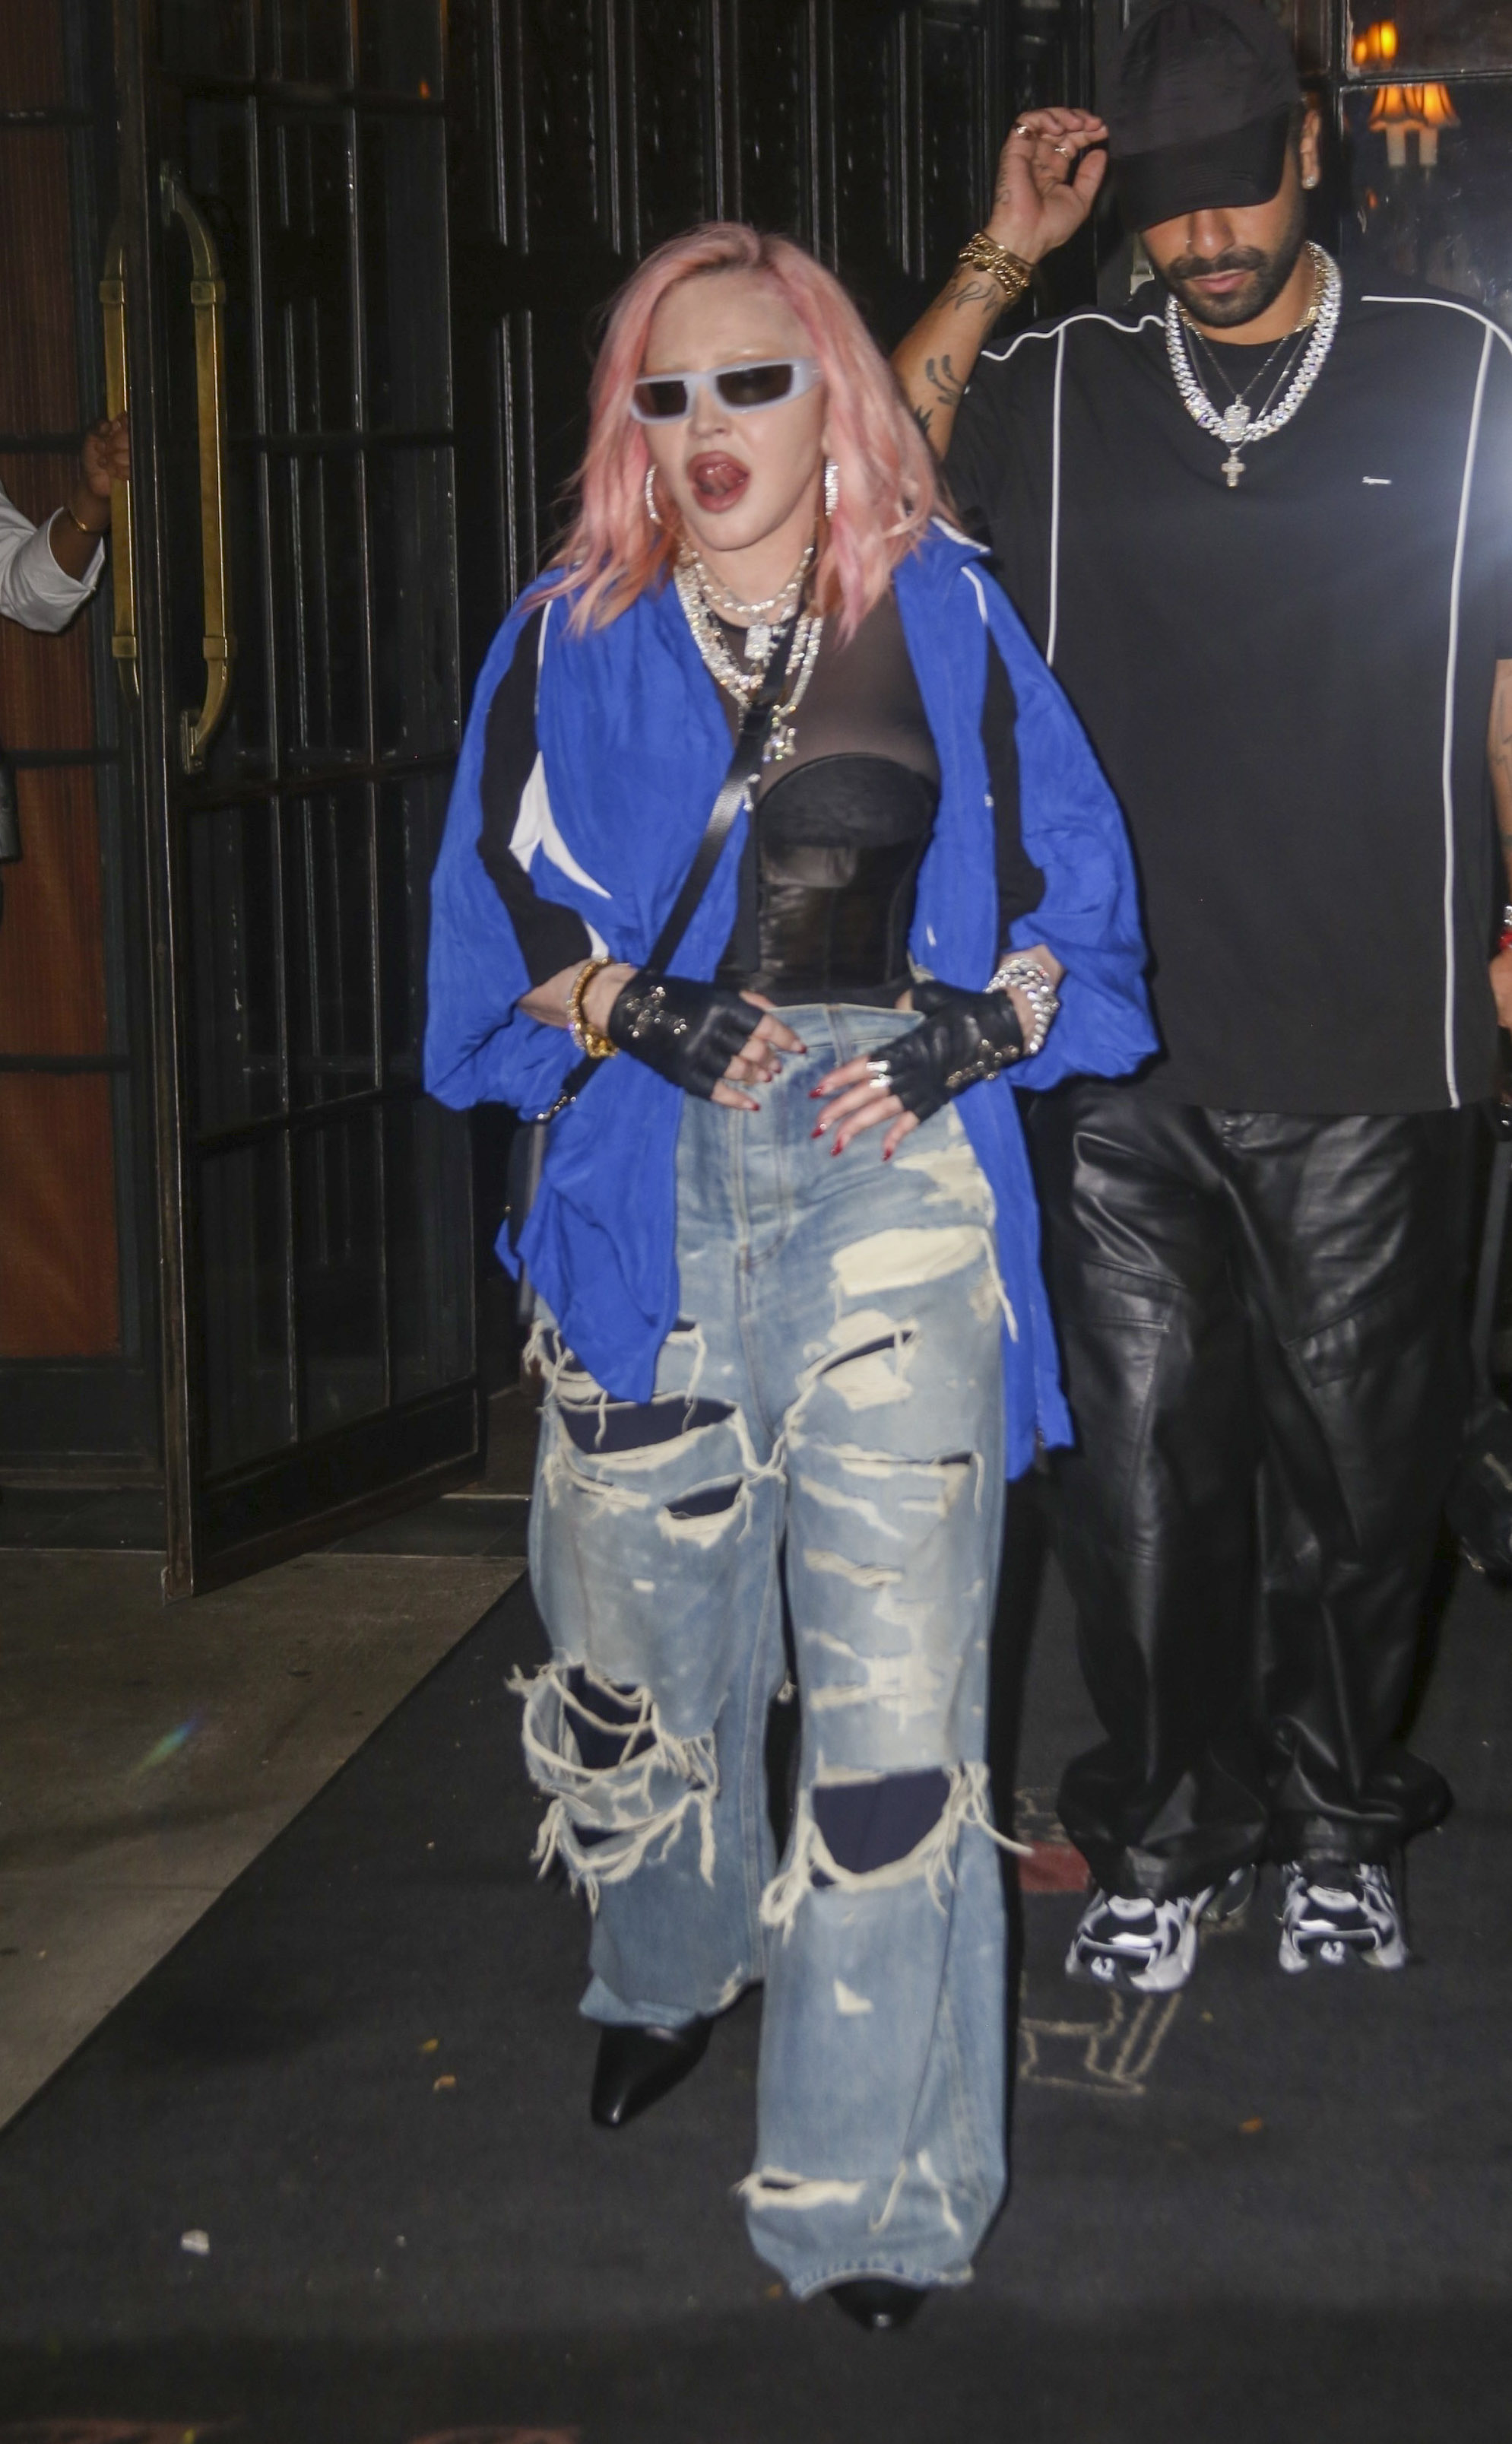 An elegant Madonna is escorted by her security out of the Bowery Hotel in New York City after attending a party.  The legendary artist wore a black bustier with ripped jeans, a blue jacket and her hair dyed light pink.